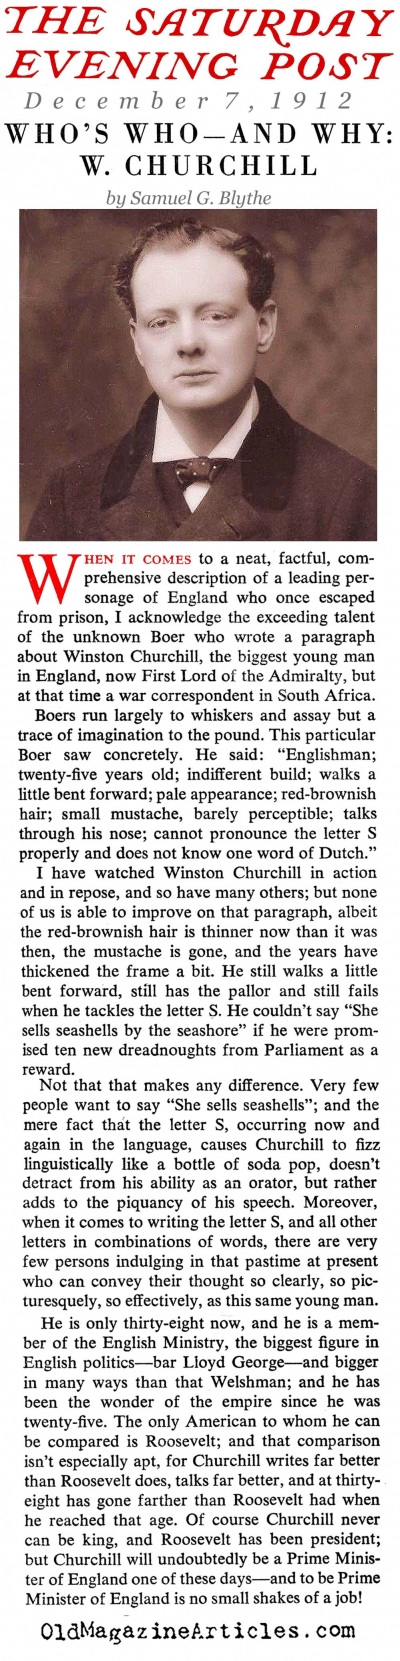 Winston Churchill: Up-and-Comer (Saturday Evening Post, 1912)